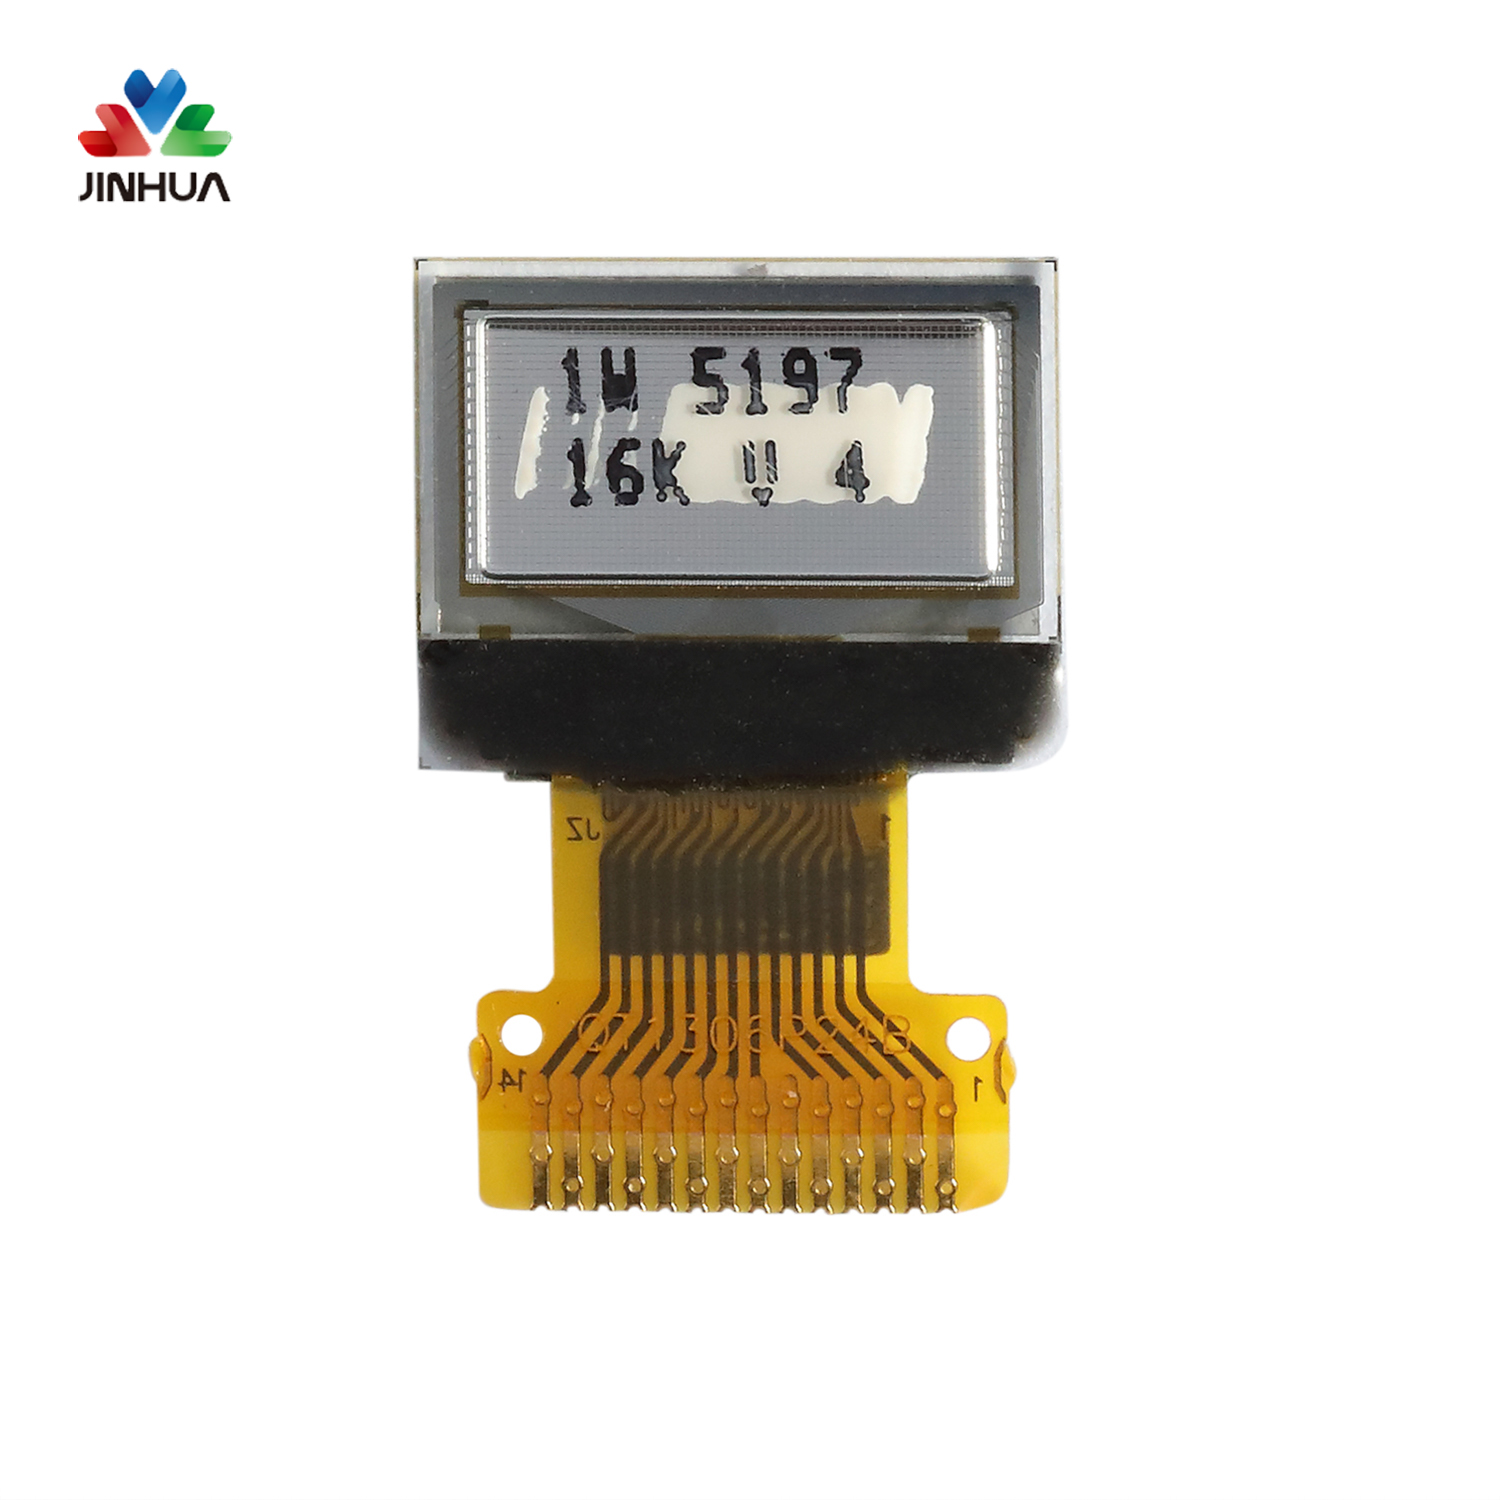 0.49 small size oled